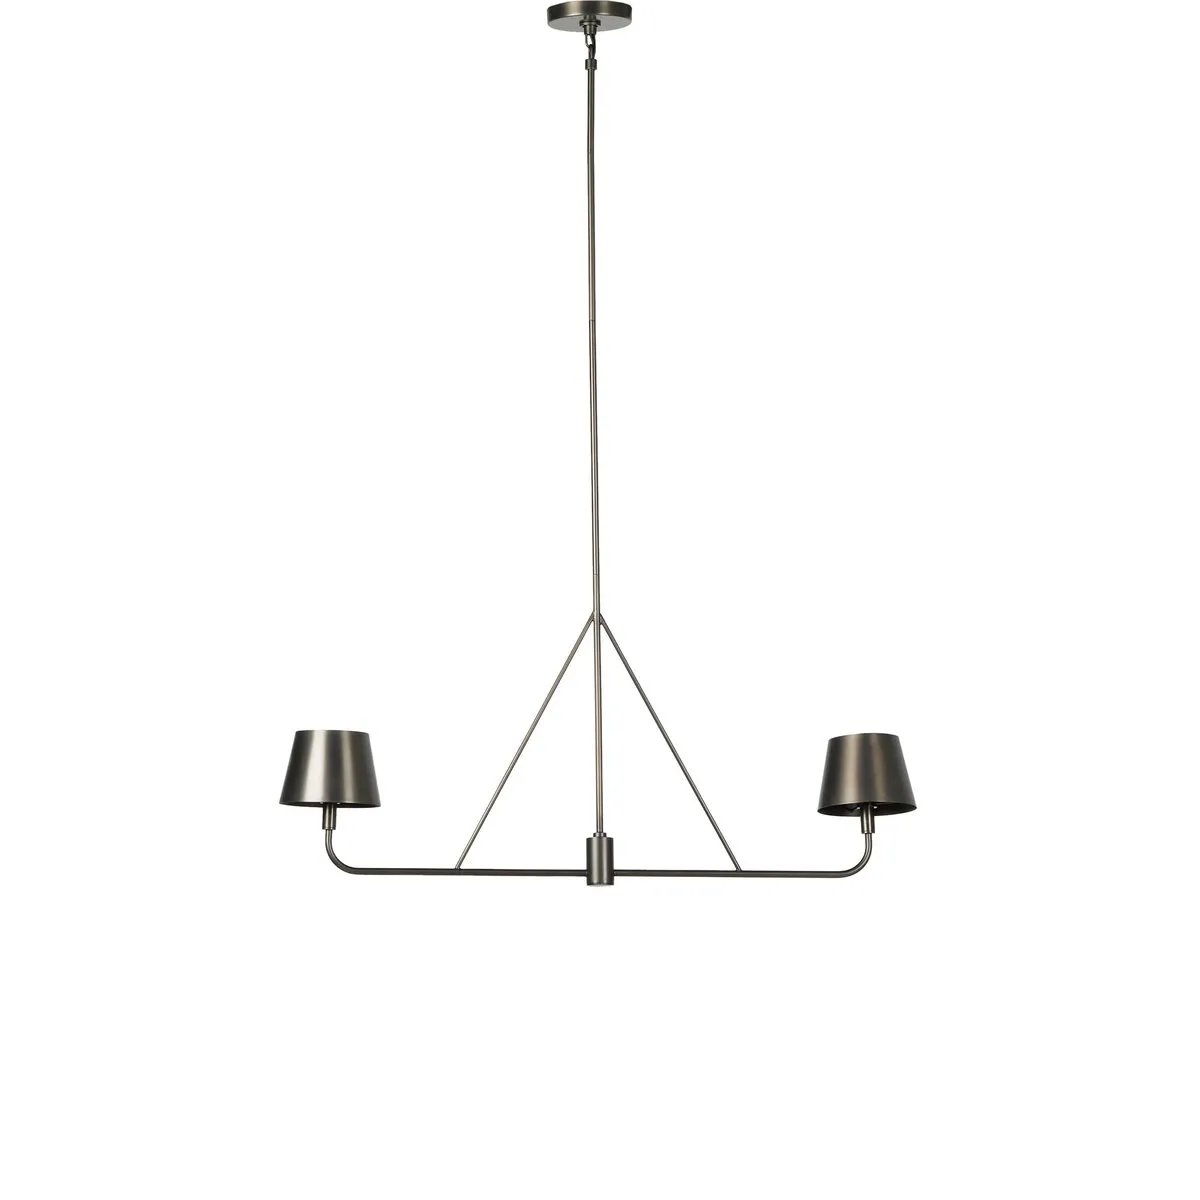 A linear chandelier reinterprets a classic design with its modern, structured lines. Crafted from iron and refreshed with a dark antique finish.Collection: Camde Amethyst Home provides interior design, new home construction design consulting, vintage area rugs, and lighting in the Newport Beach metro area.